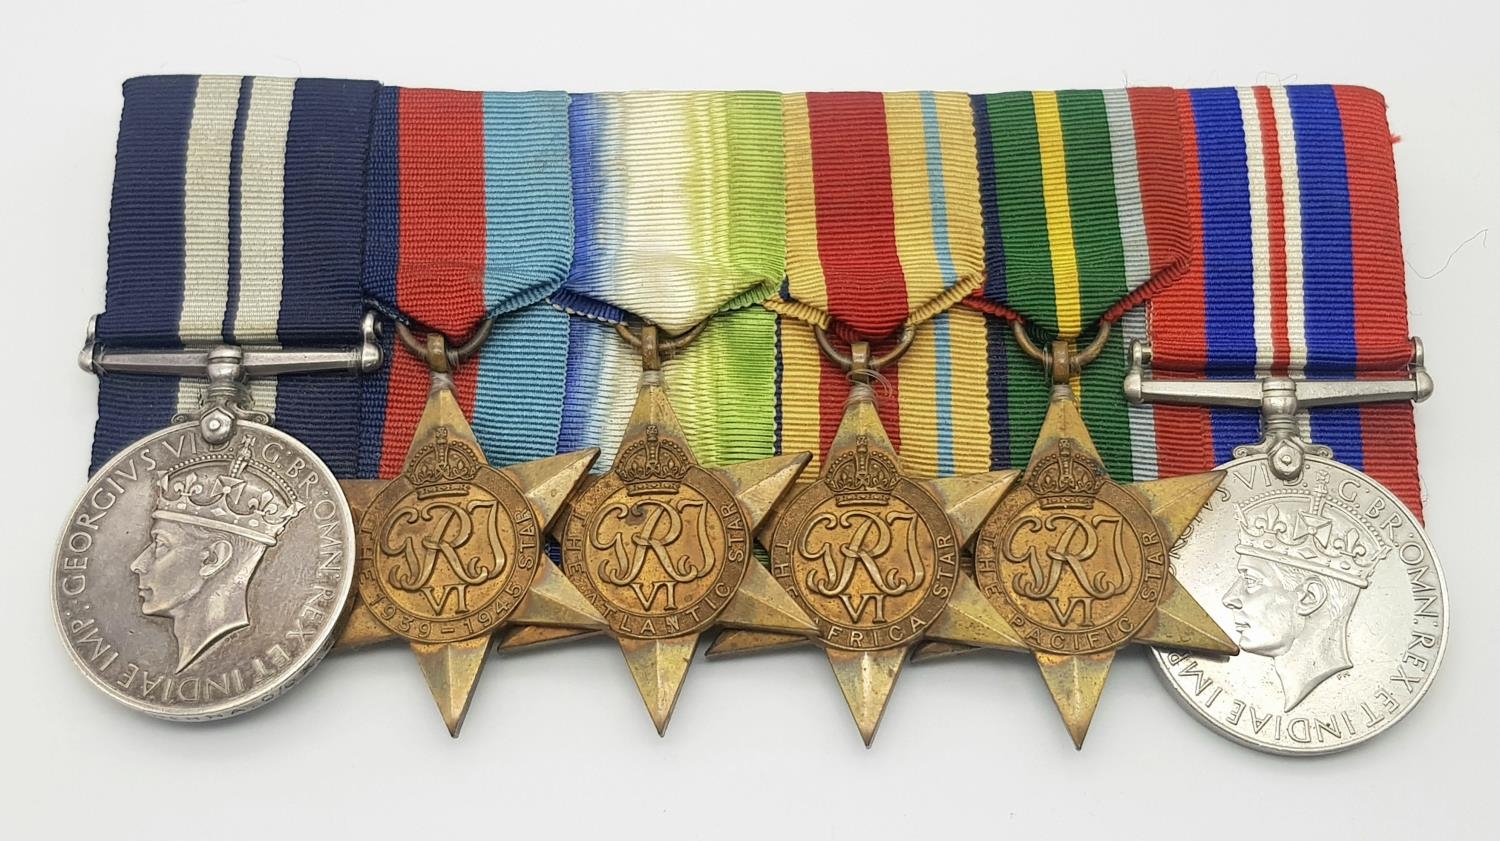 A WW2 Distinguished Service Medal group of six to a Royal Navy Petty Officer for DEMS operations